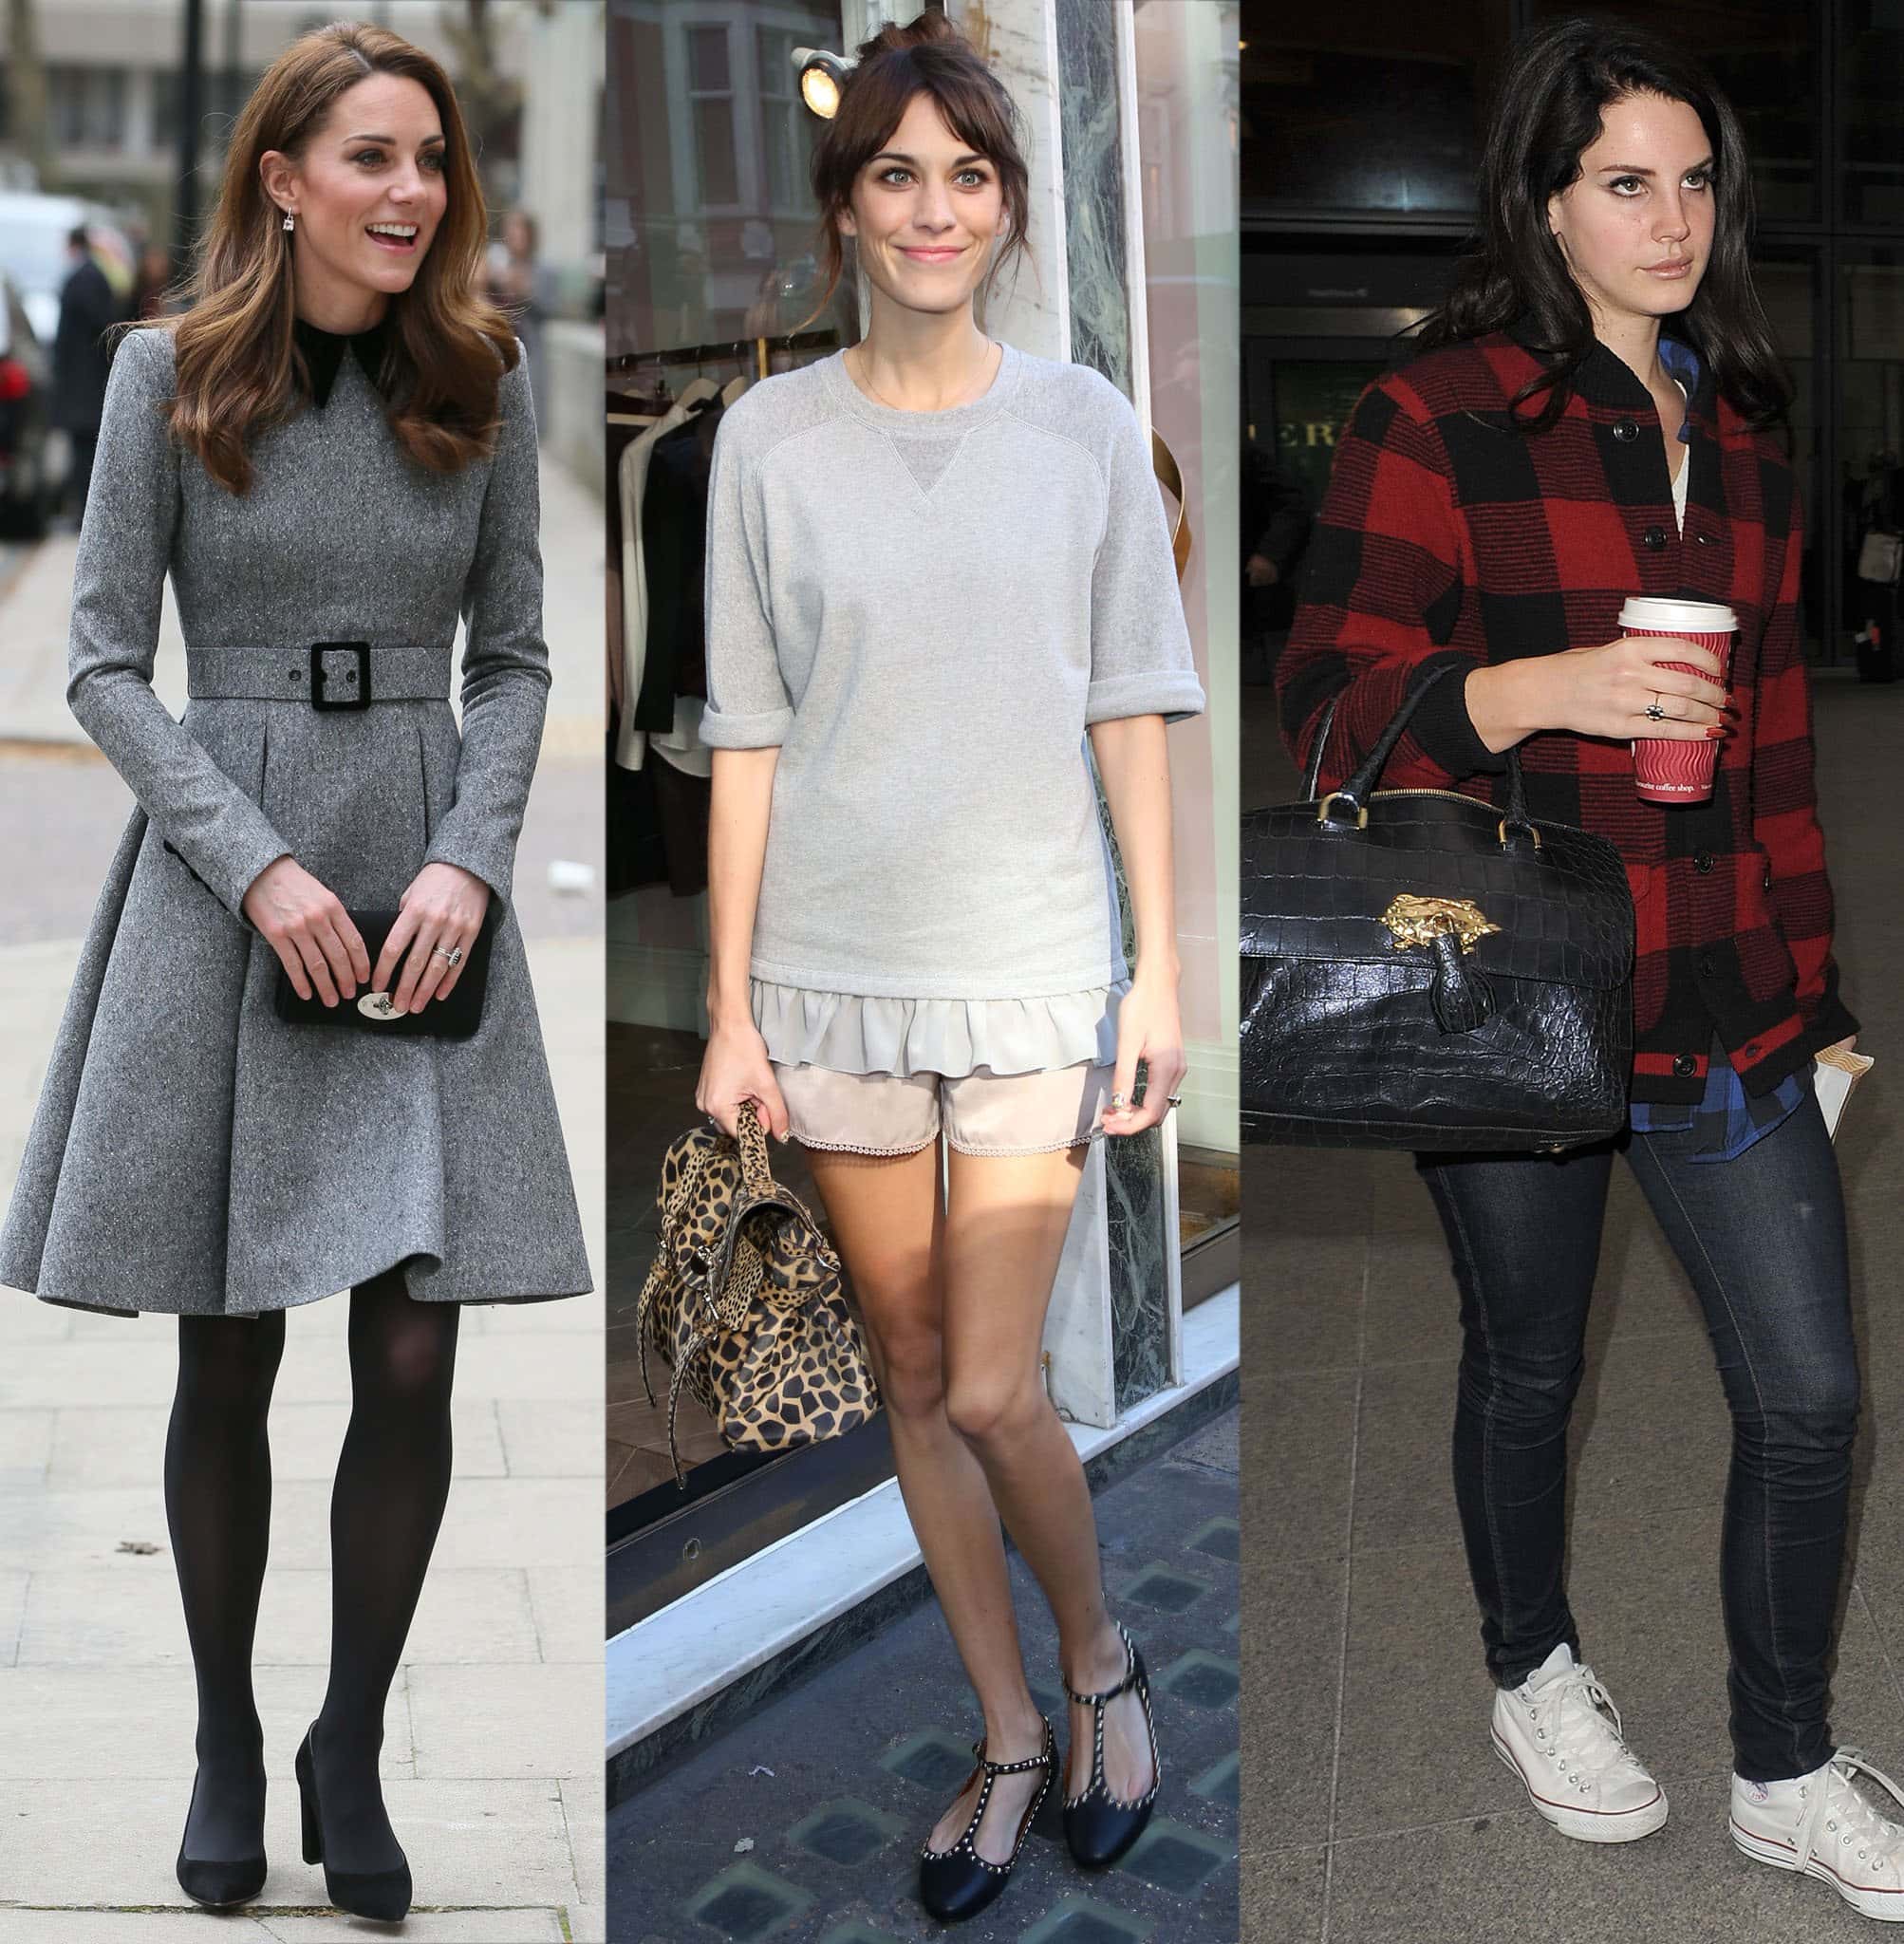 Icons of Style: Catherine, Duchess of Cambridge, Alexa Chung, and Lana Del Rey elegantly showcase the versatility and timeless appeal of Mulberry bags